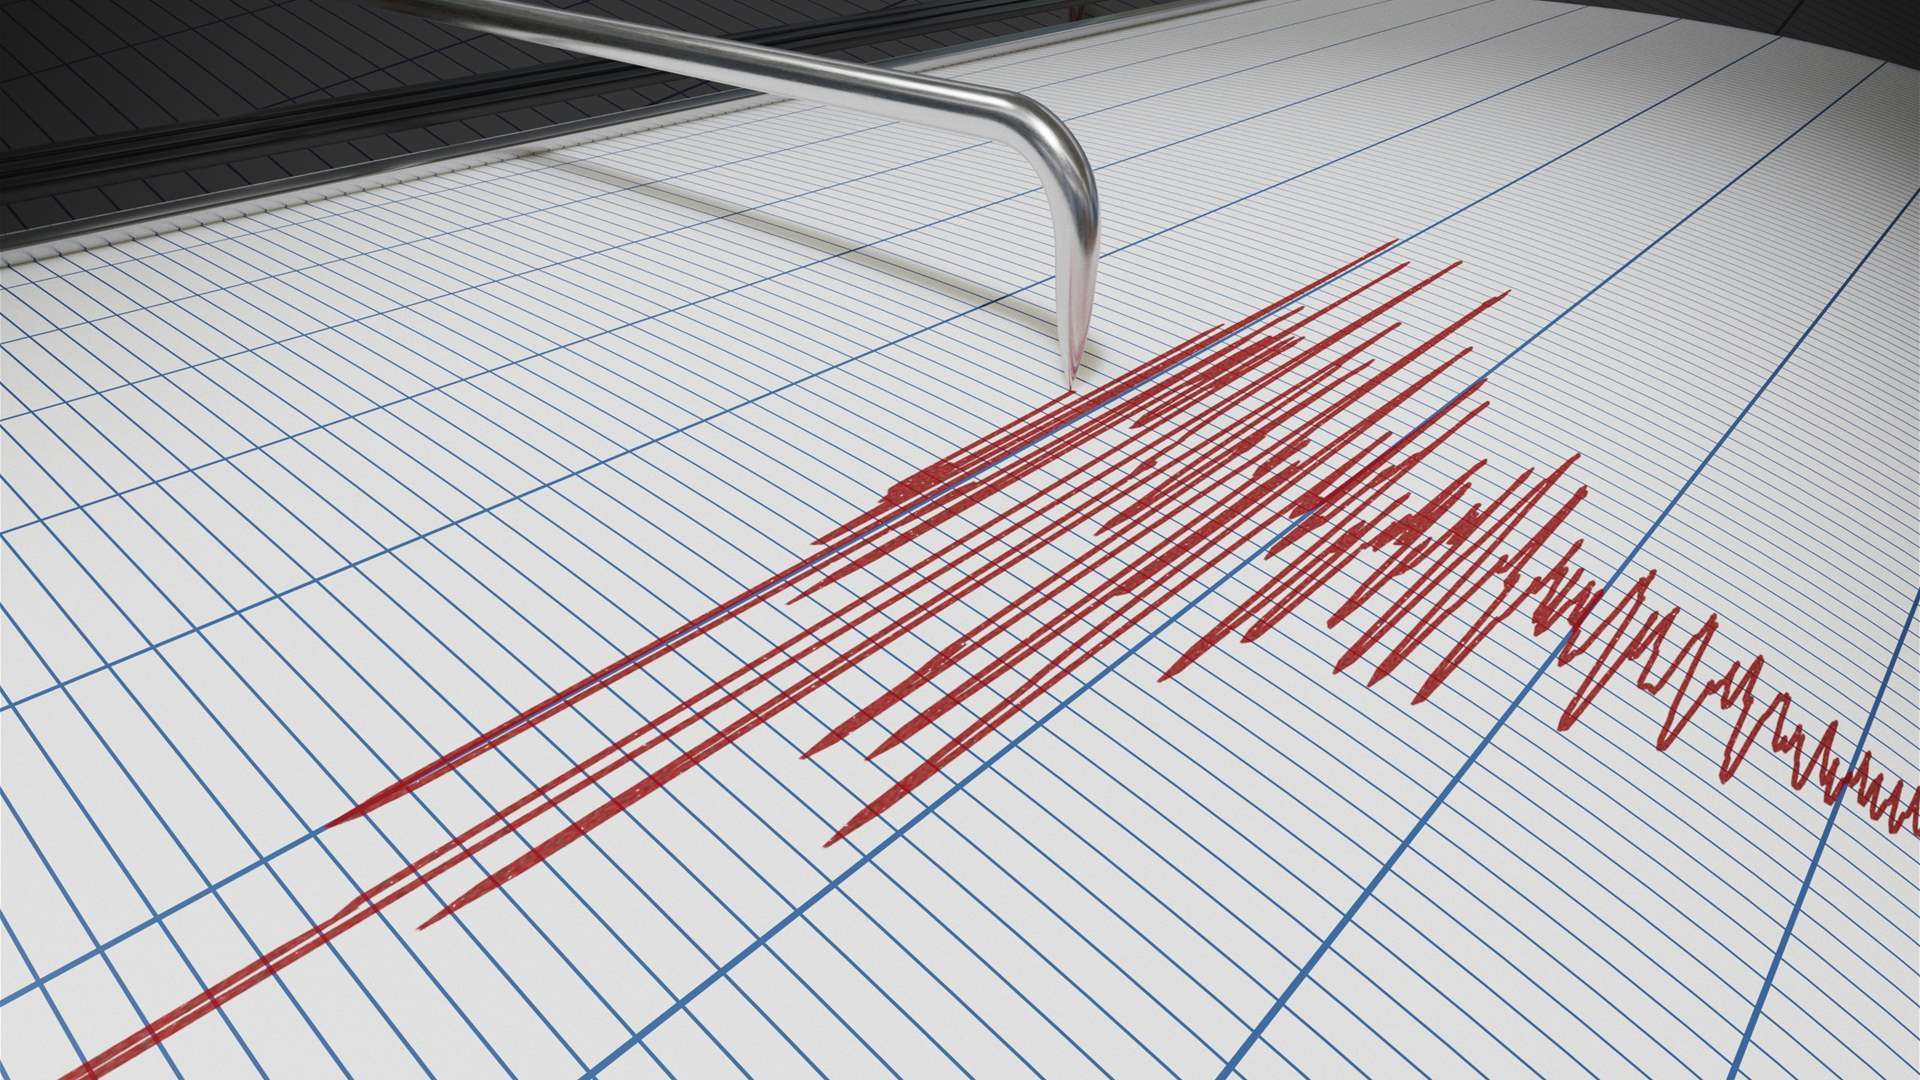 Dozens of earthquakes cause panic in volcanic area in southern Italy